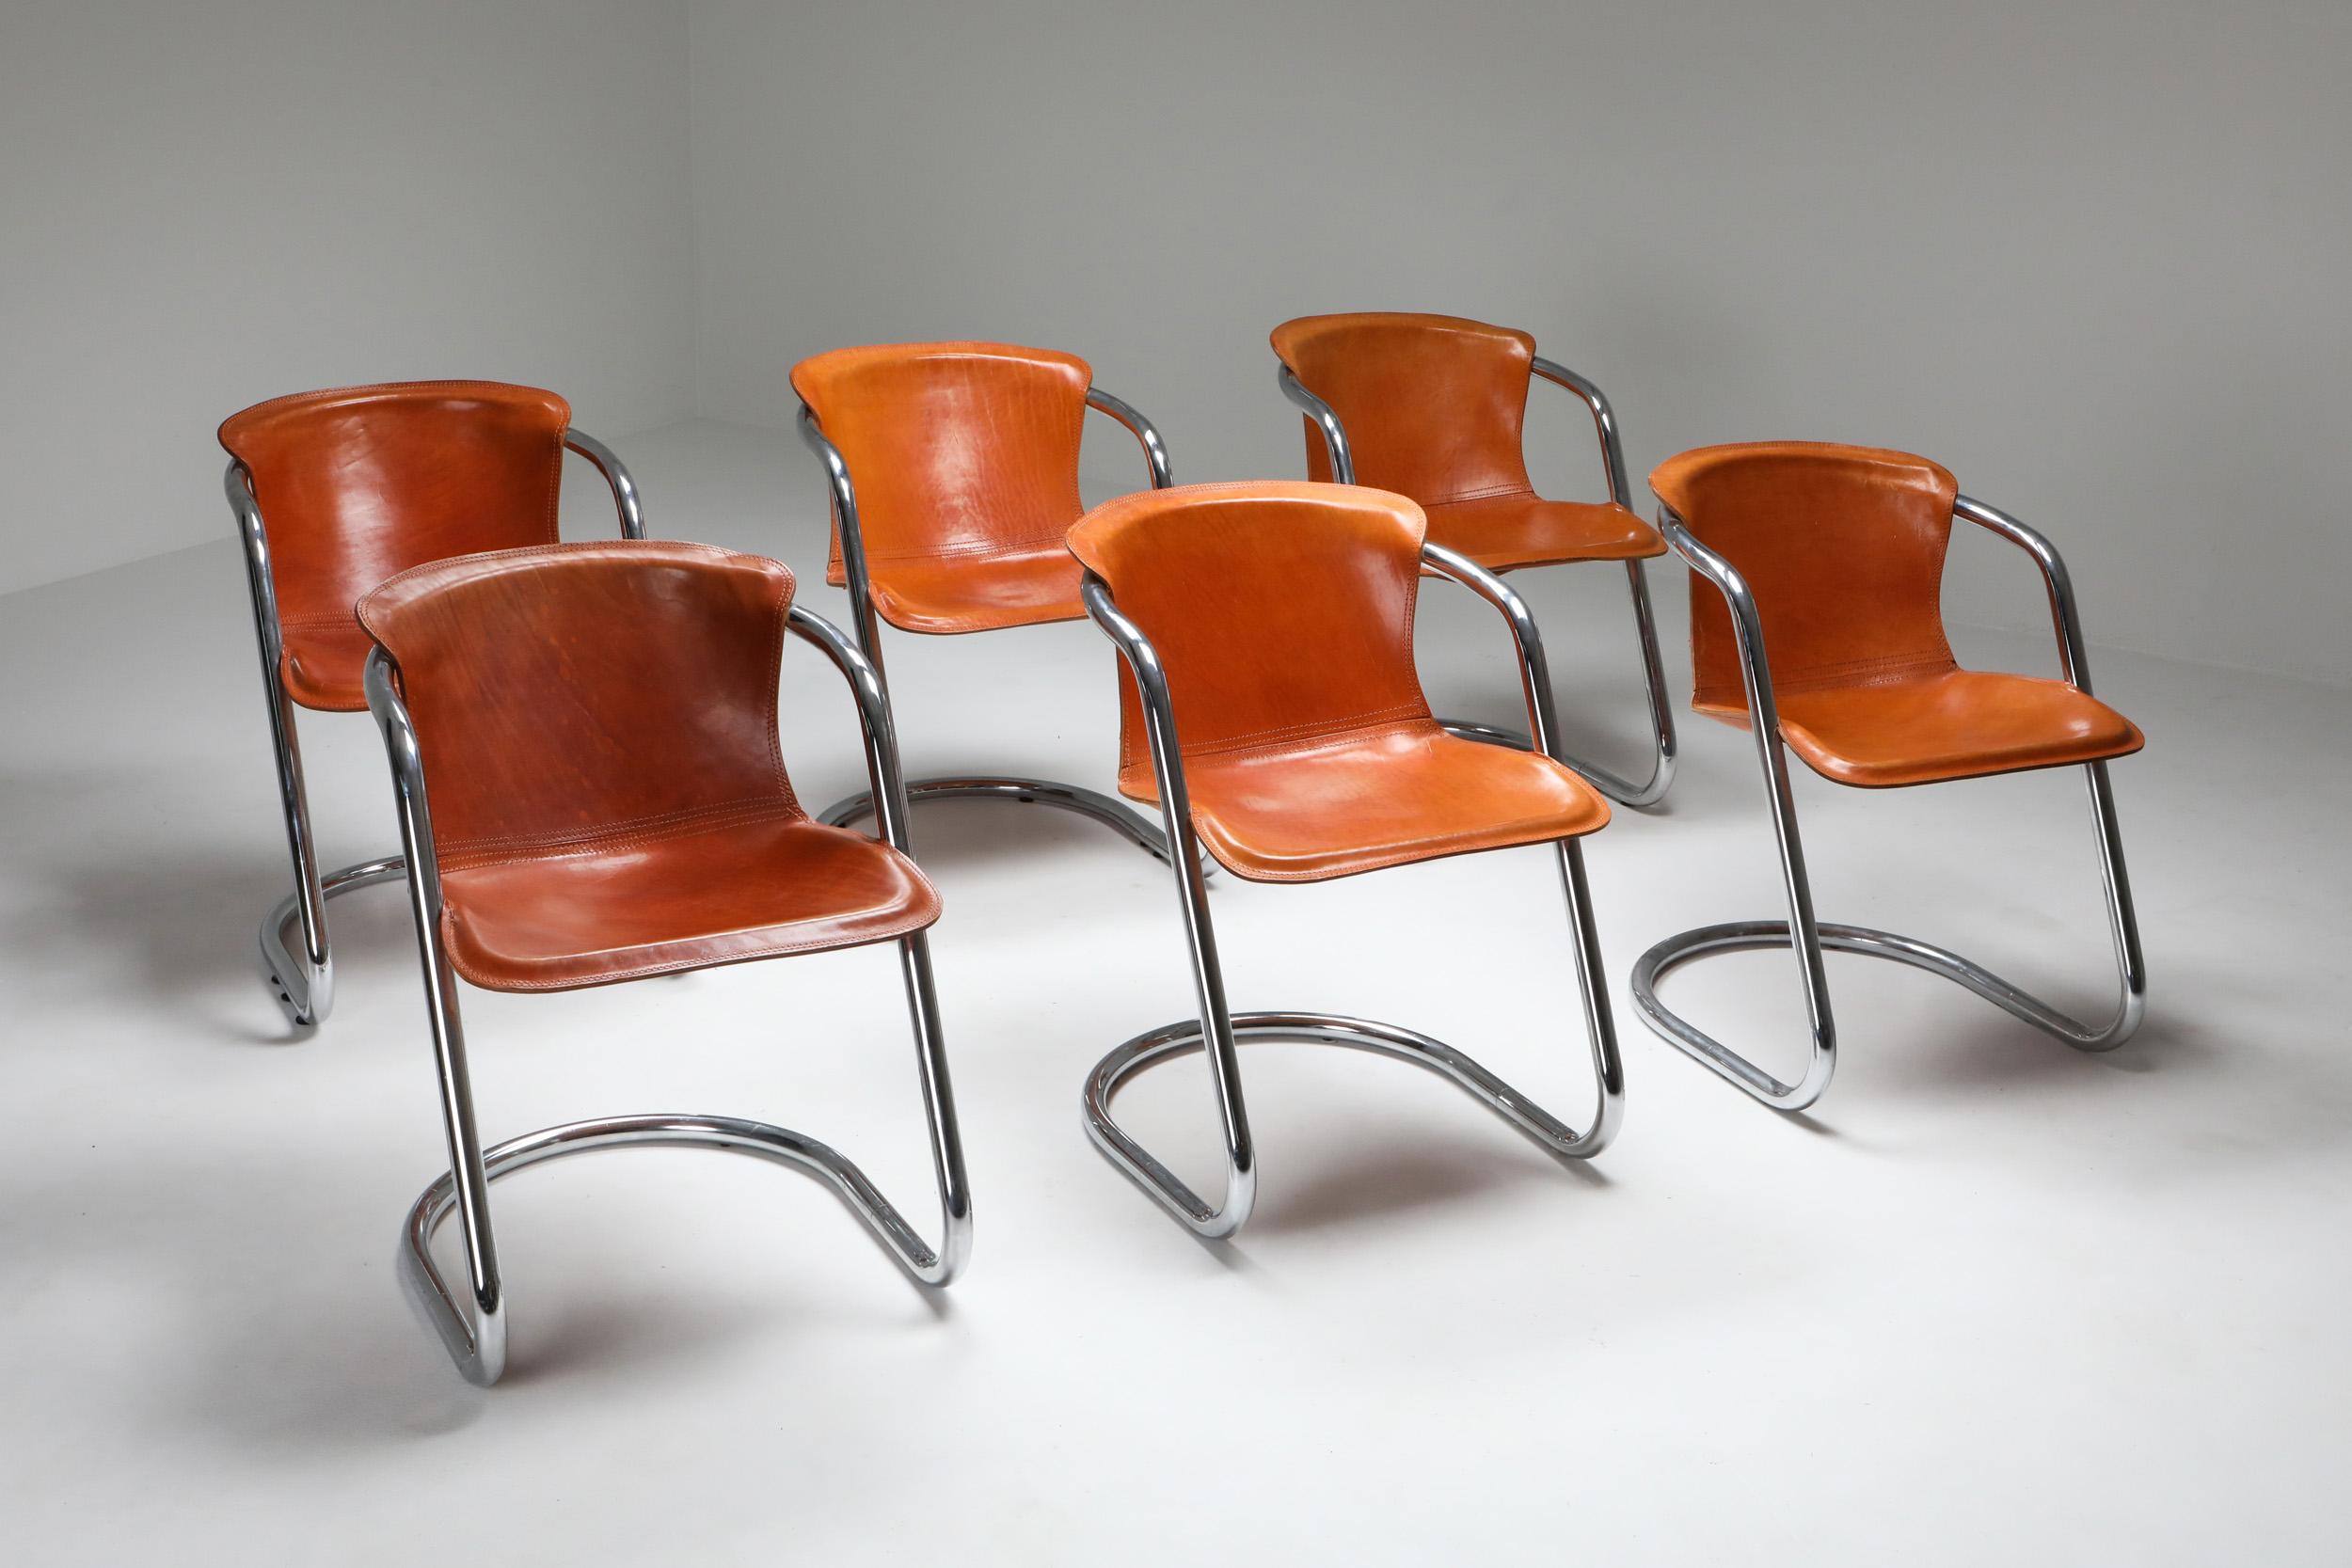 Cognac saddle leather dining chairs, set of six, Willy Rizzo, Cidue, Italy, 1970s

Superb set of armchairs by Willy Rizzo, a famous fashion photographer who became a furniture designer best known for it's Italian glam style.
The tubular chrome